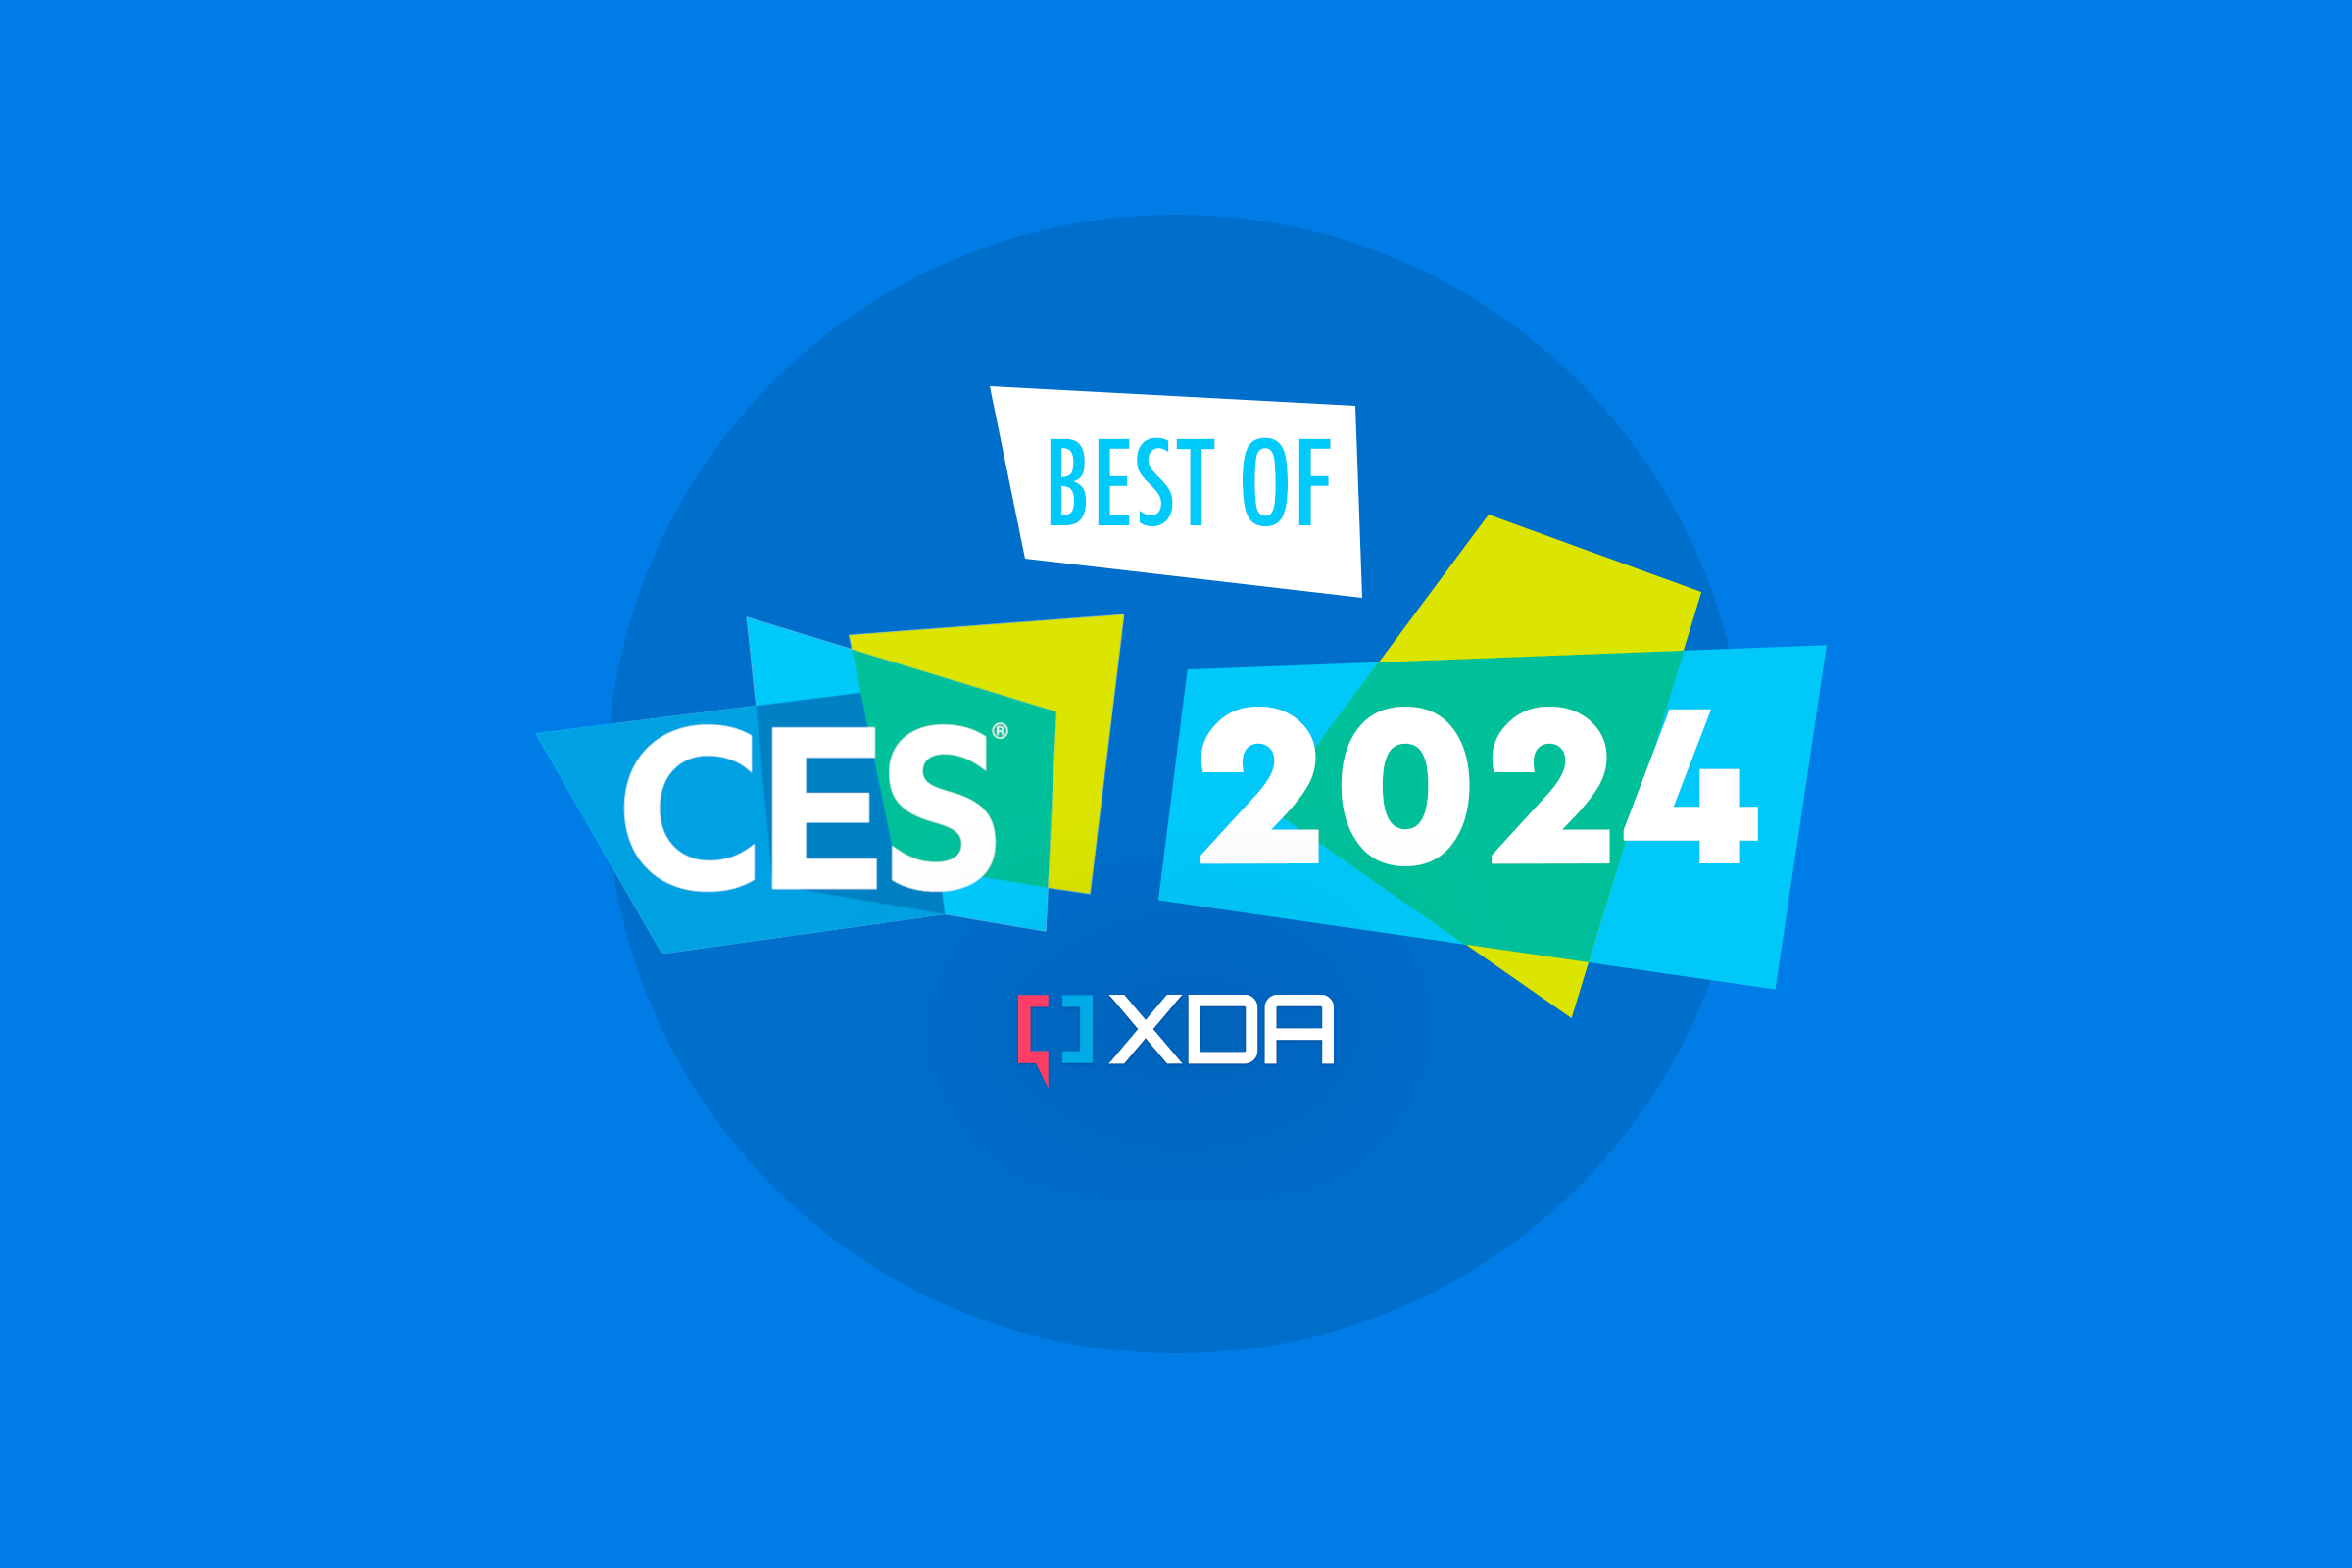 A colorful image with text reading Best of CES 2024